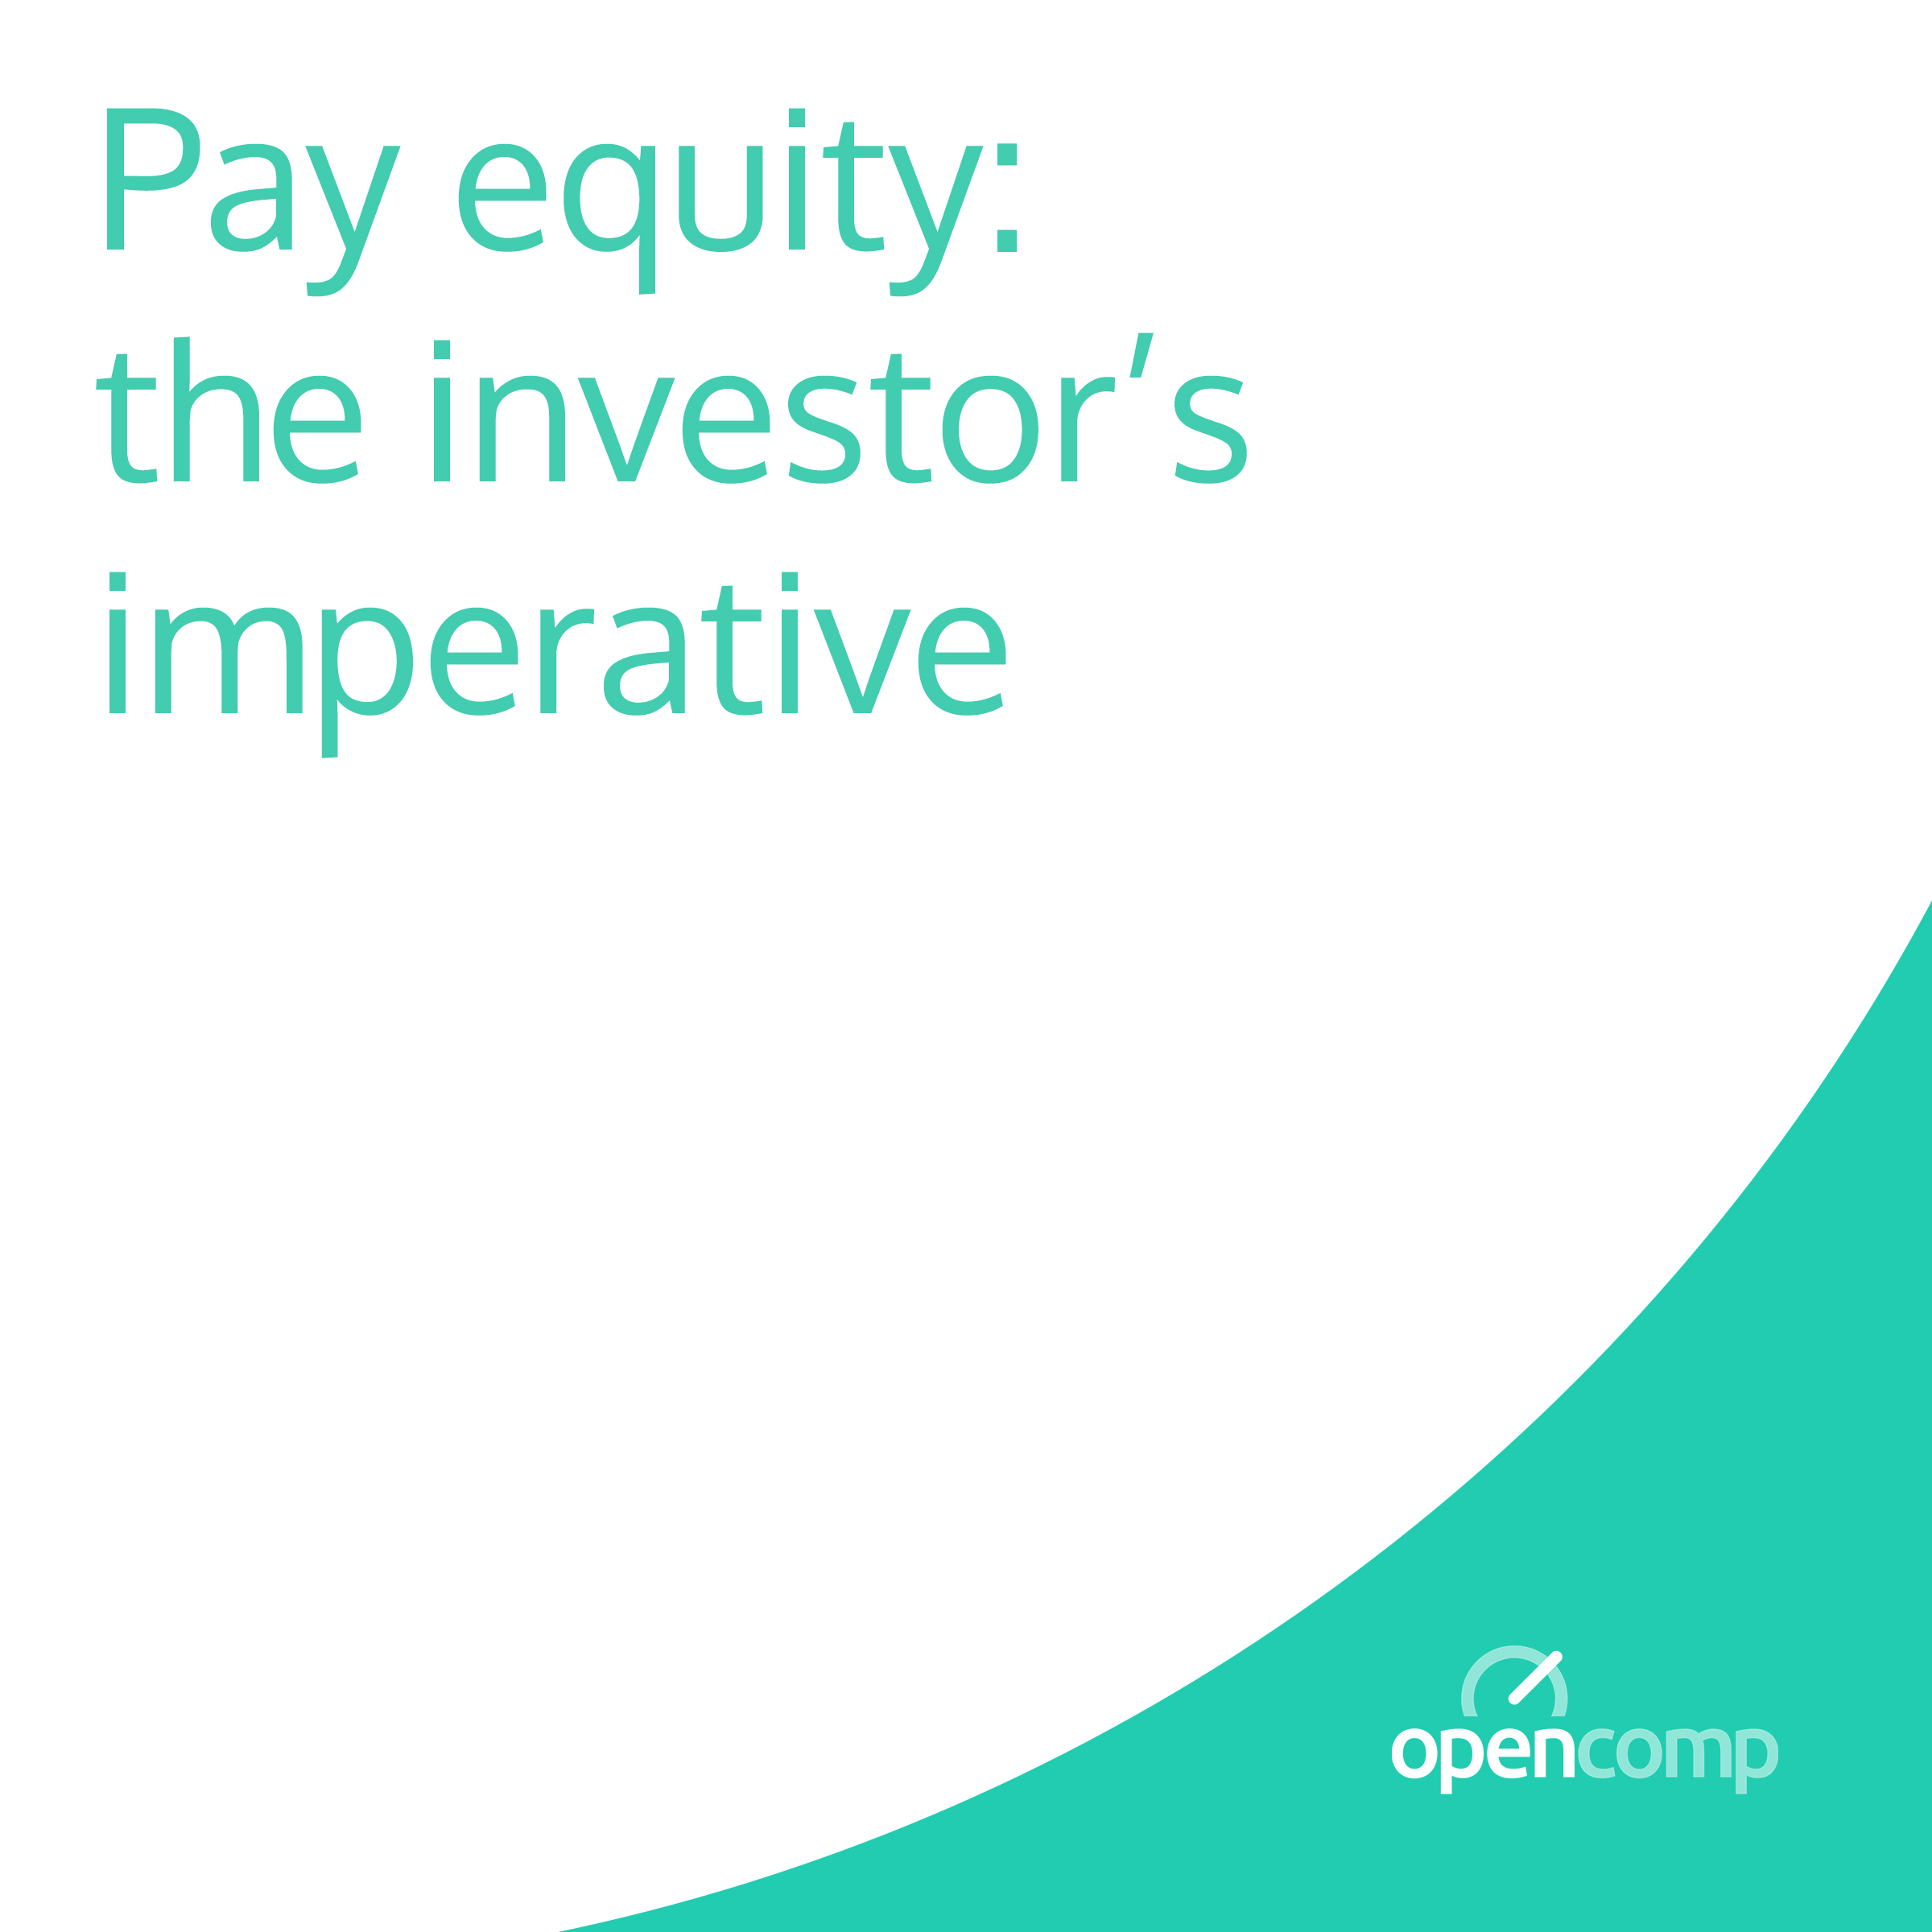 Pay equity: the investor’s imperative